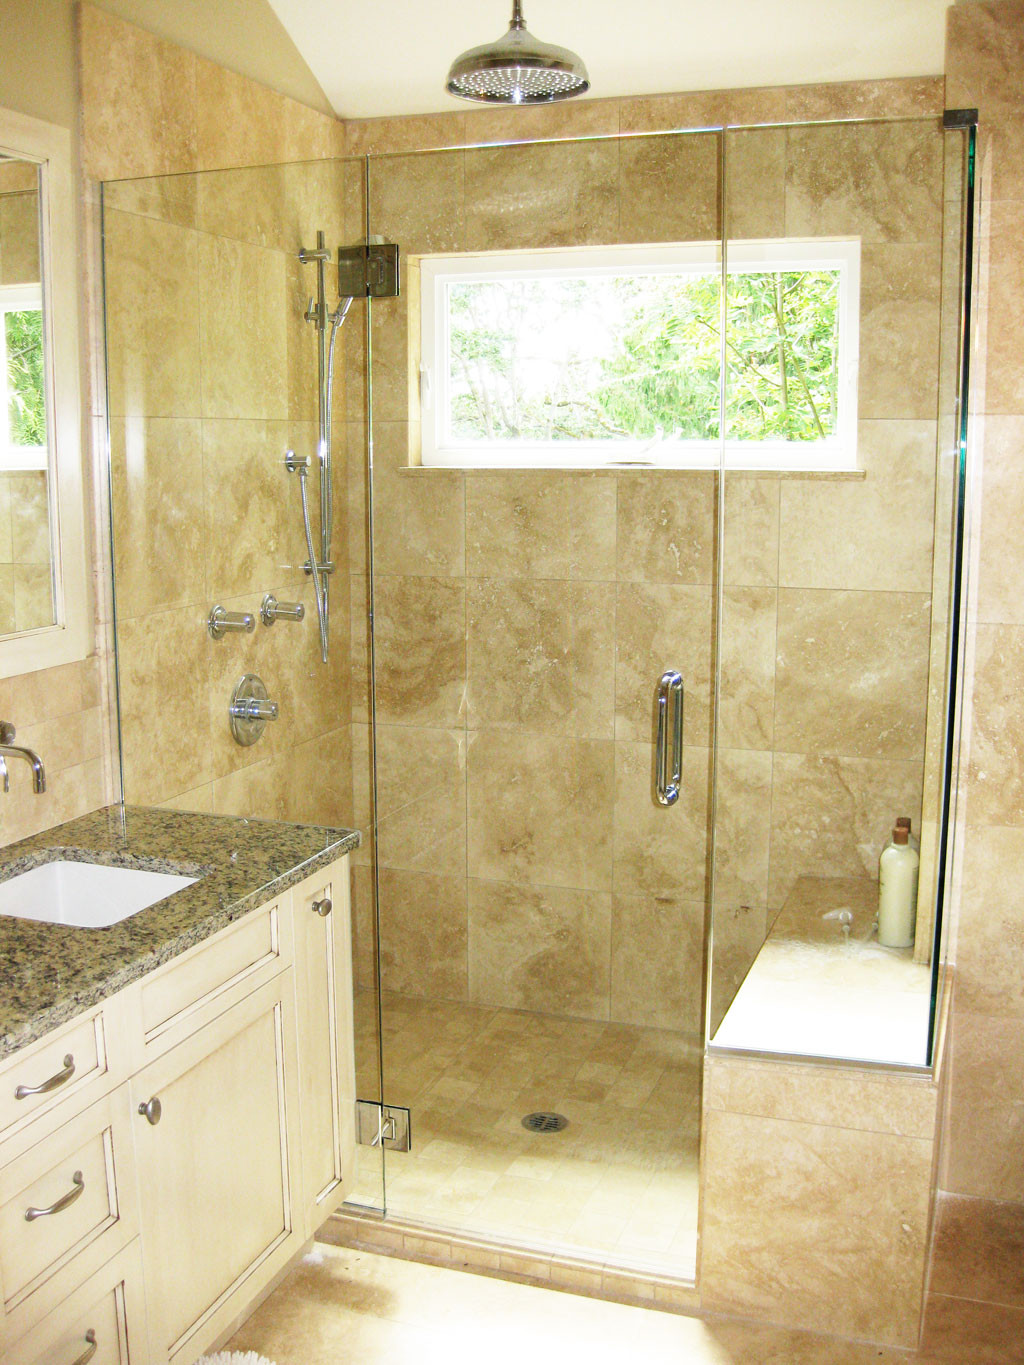 Picture Of Bathroom Showers
 Picture gallery of our custom glass showers & bathrooms in